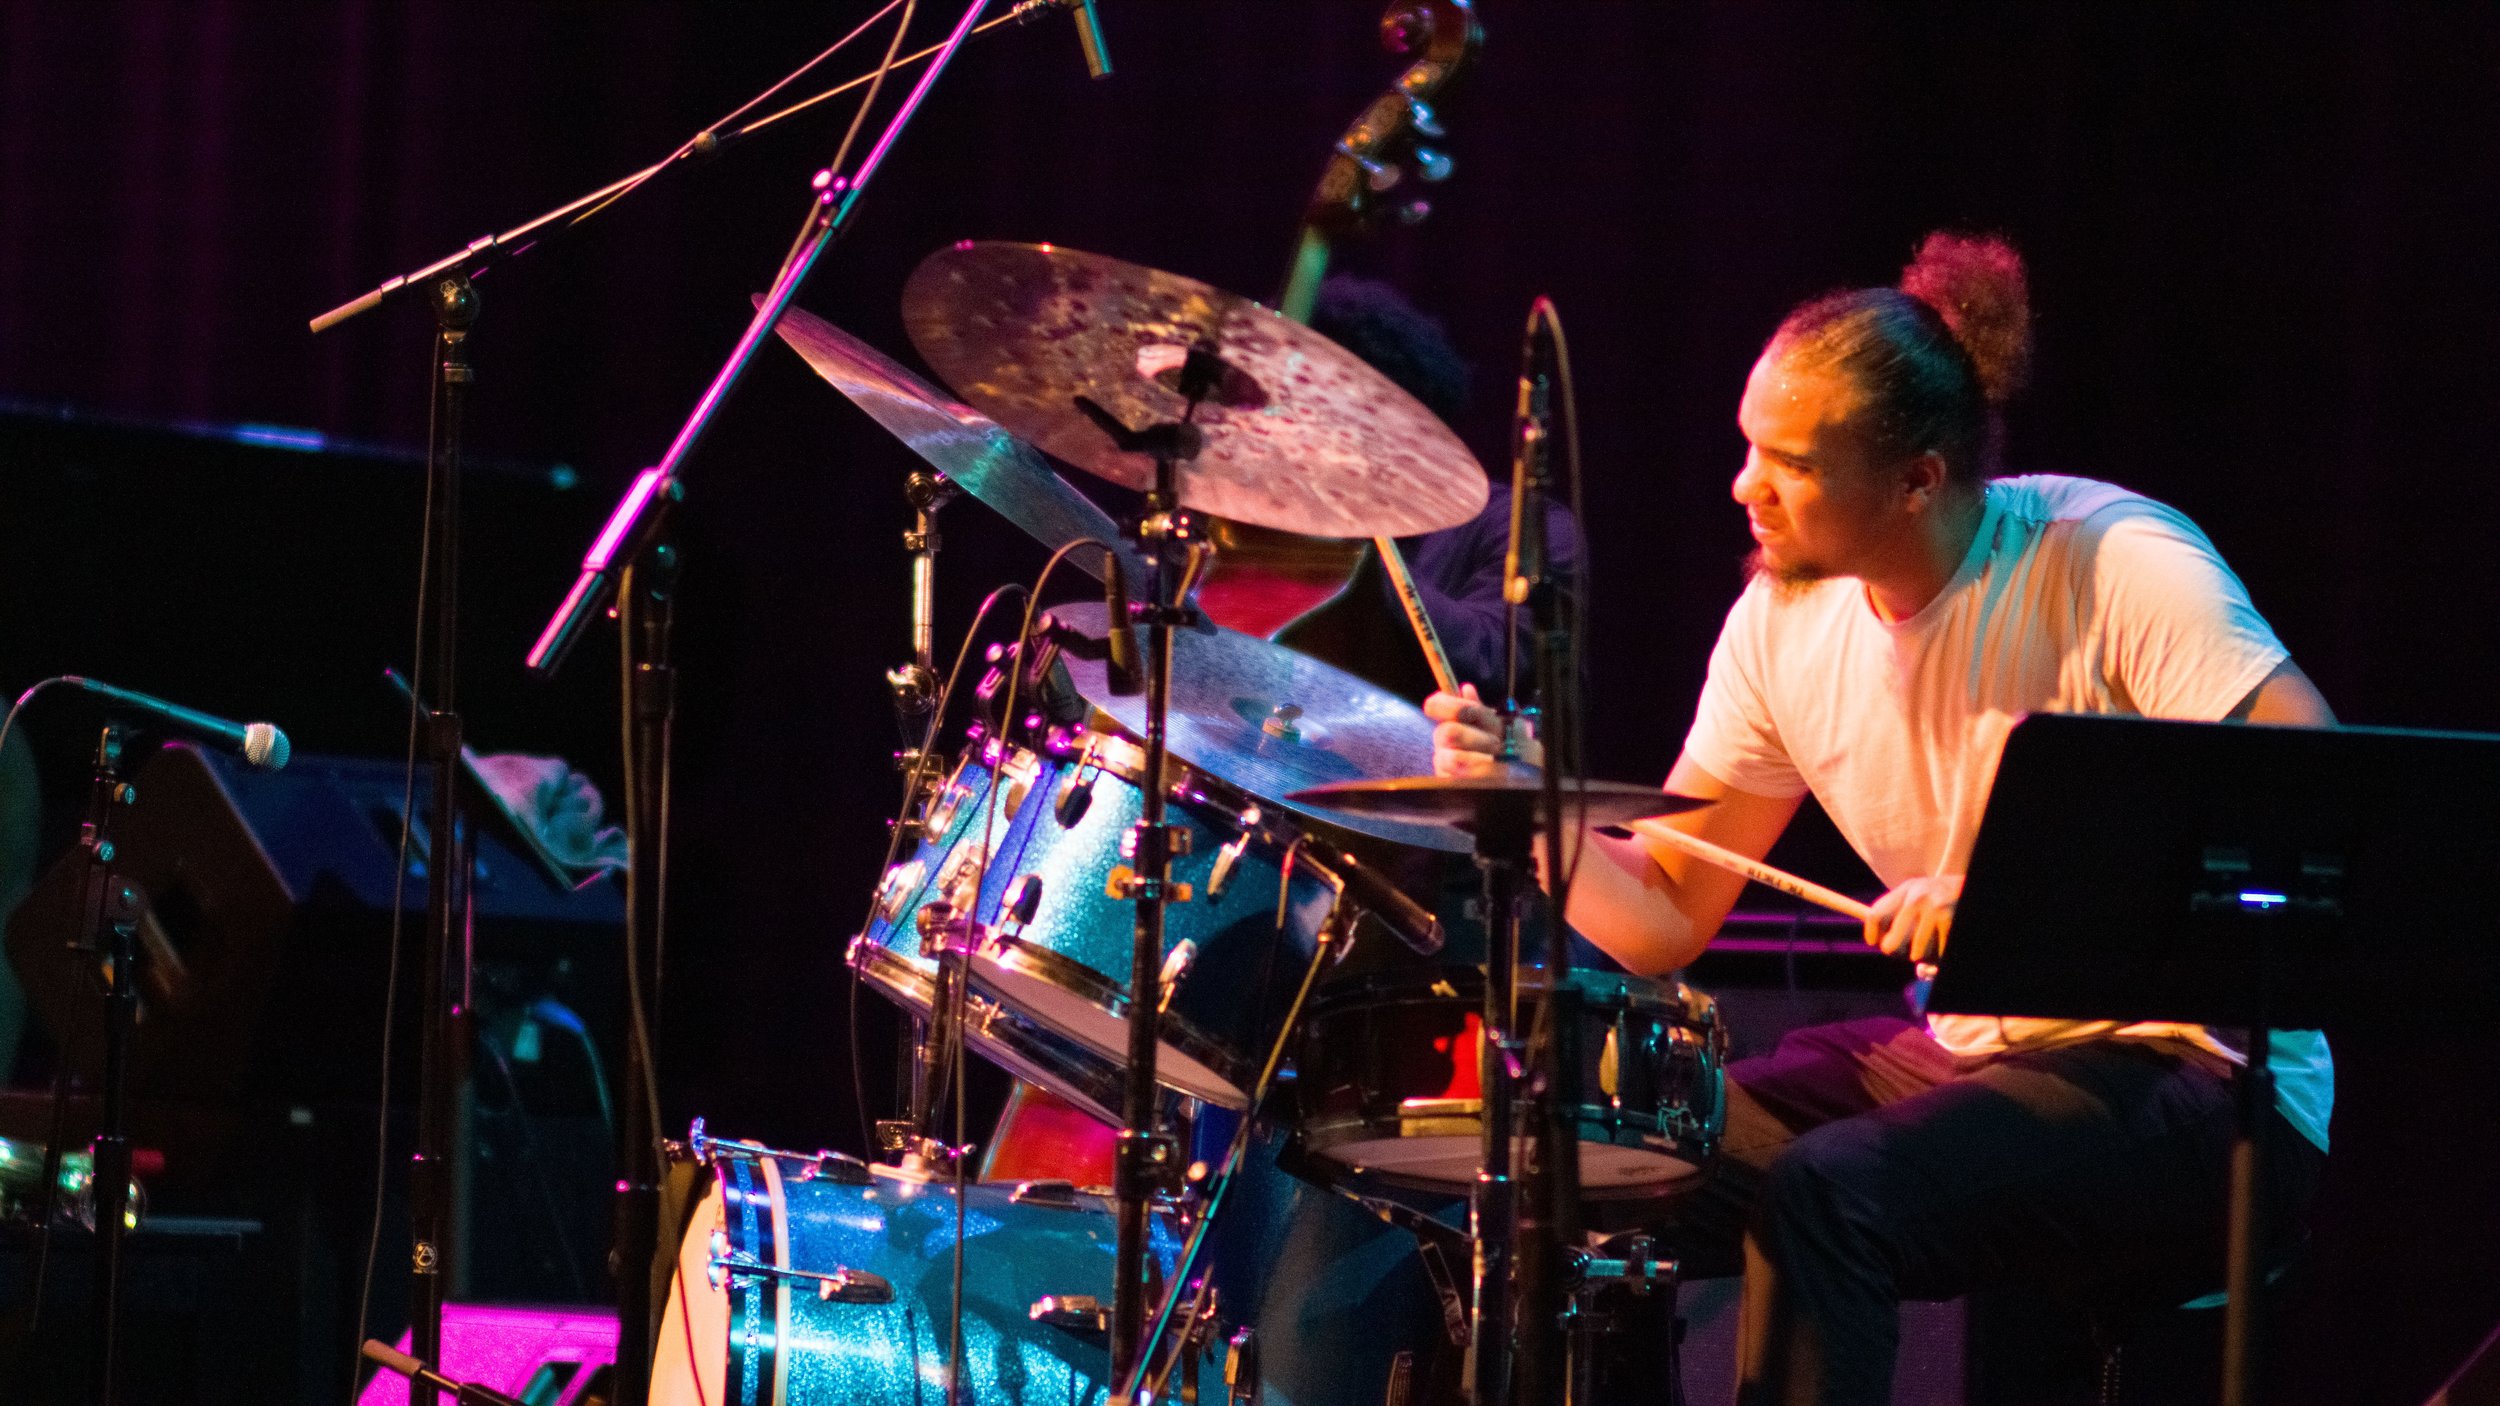  Ele Howell plays drums at the Santa Monica College Performing Arts Center, Santa Monica, Calif. as part of Ravi Coltrane's group on Sept. 23 2022. It was the birthday of Ravi Coltrane's late father John Coltrane. The performance was dedicated to Pha